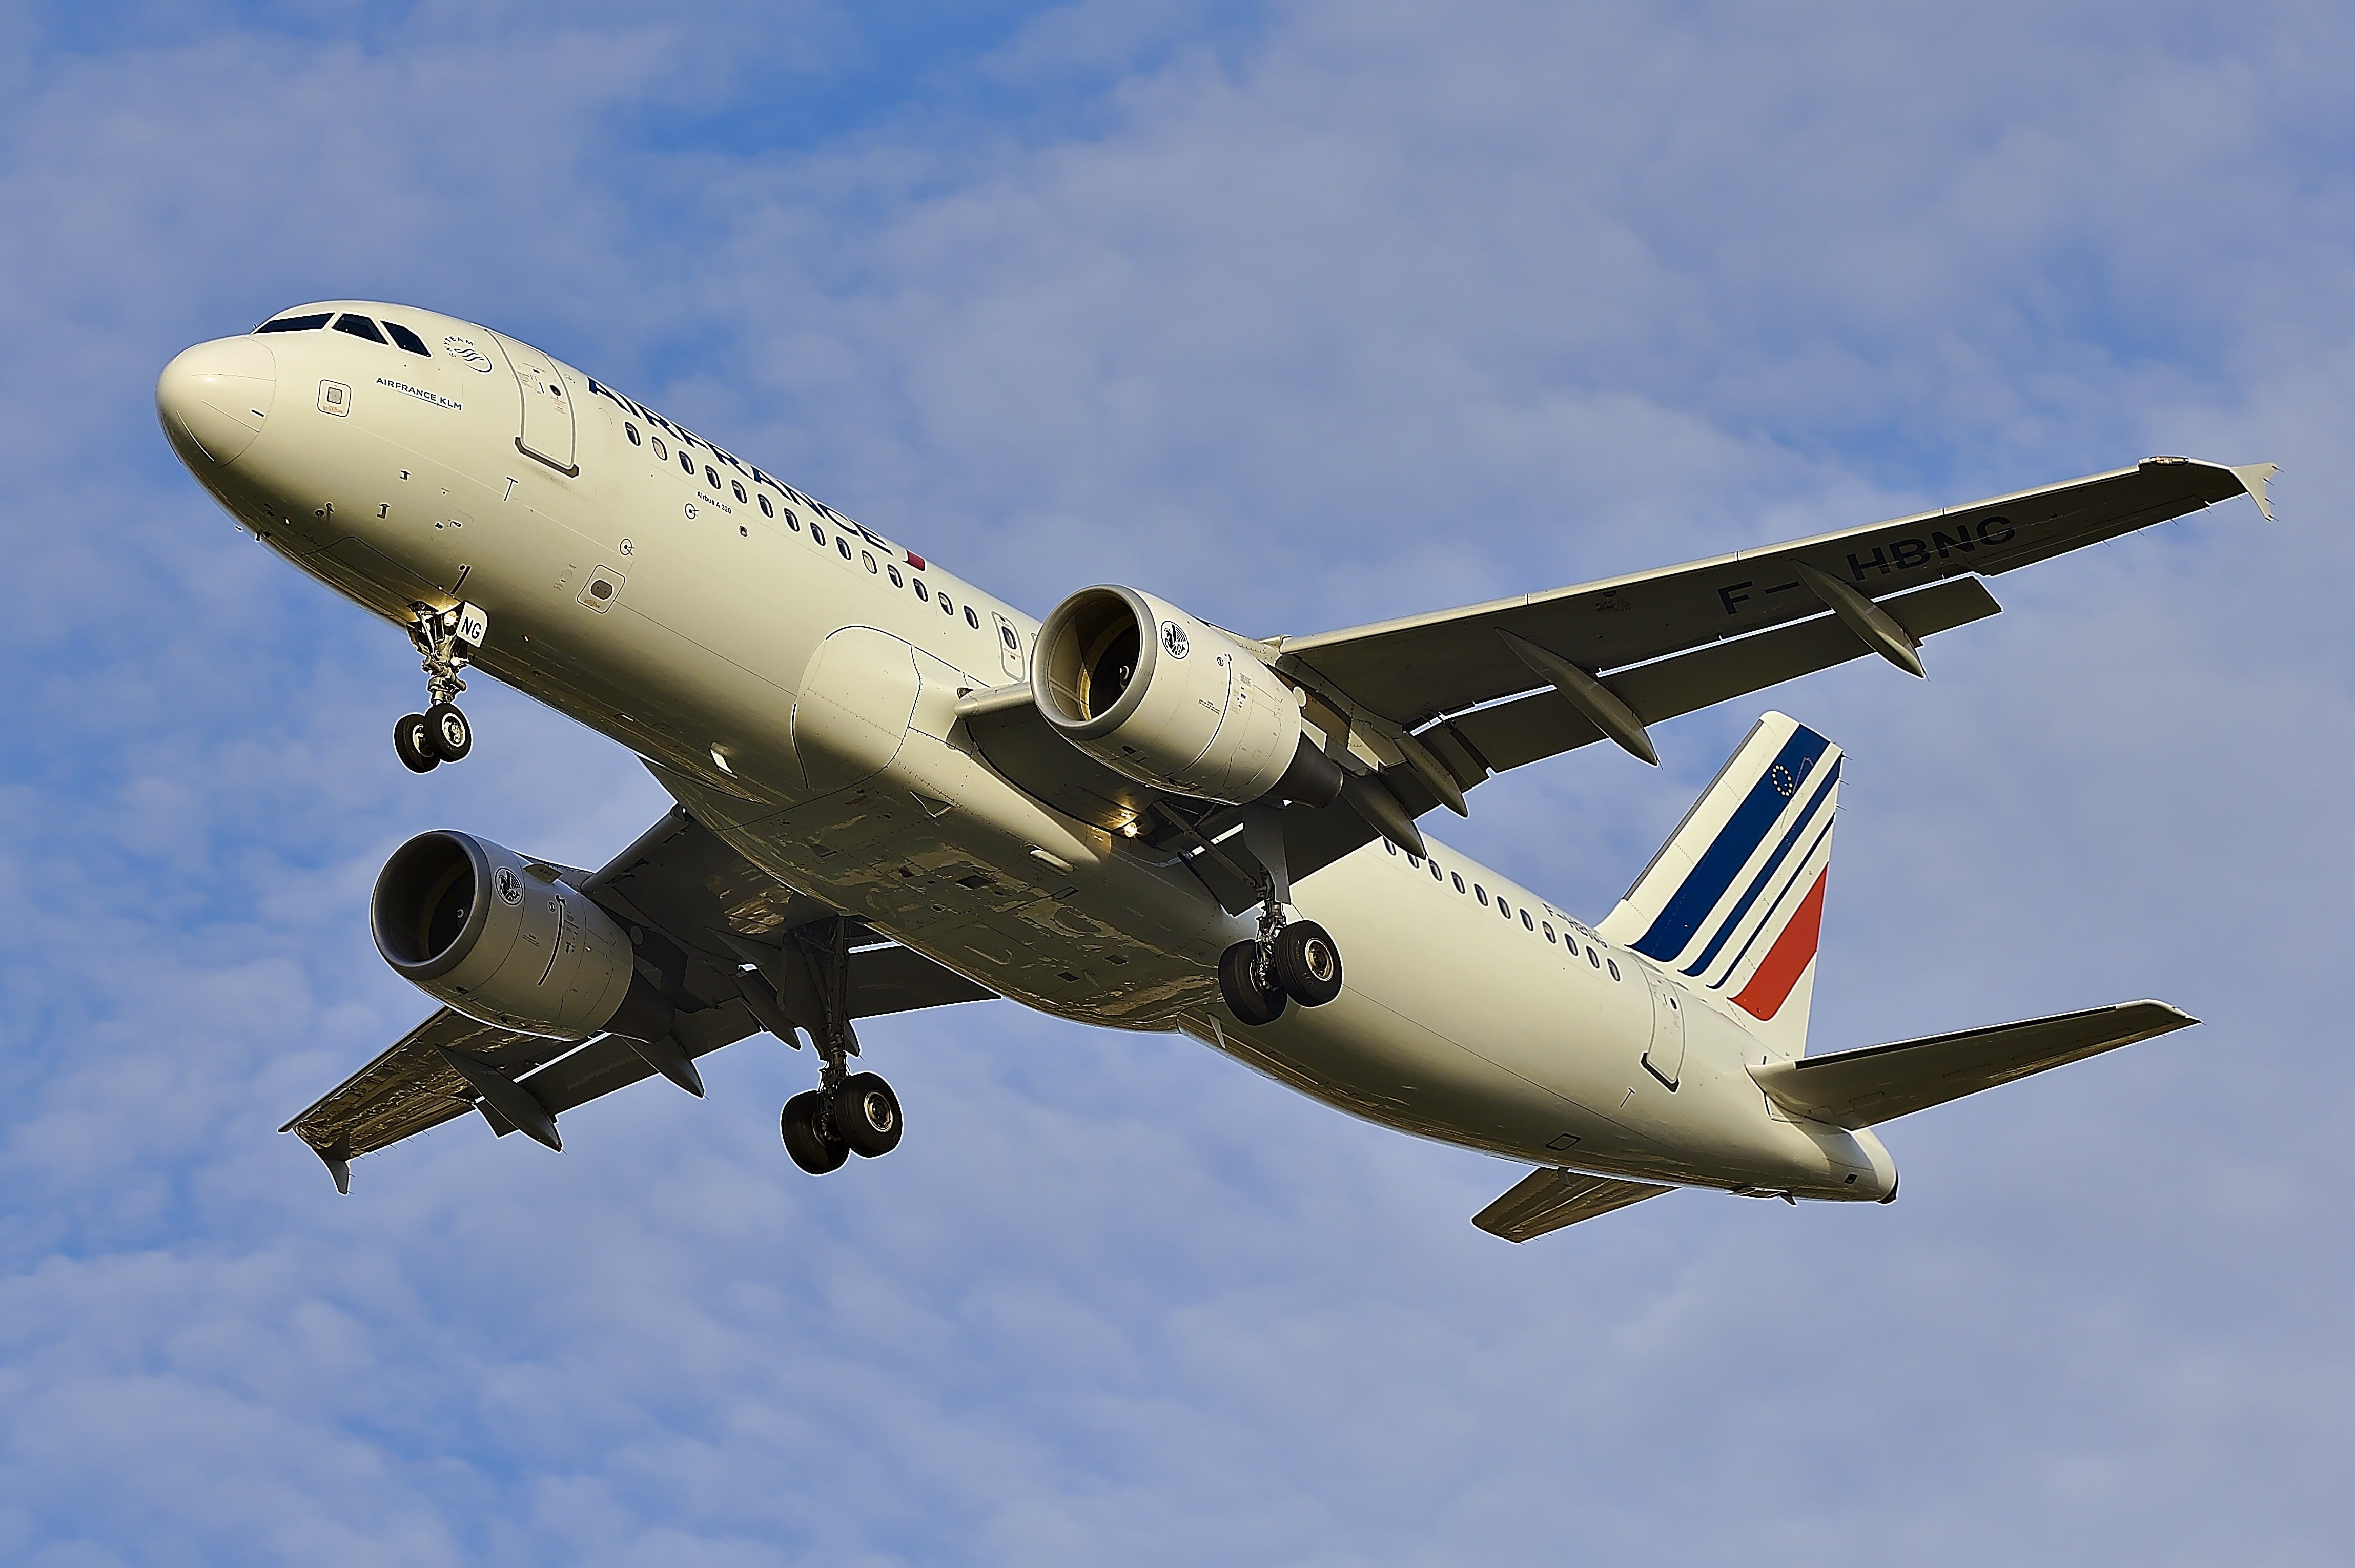 Air France becomes the first major airline to be led by a female CEO